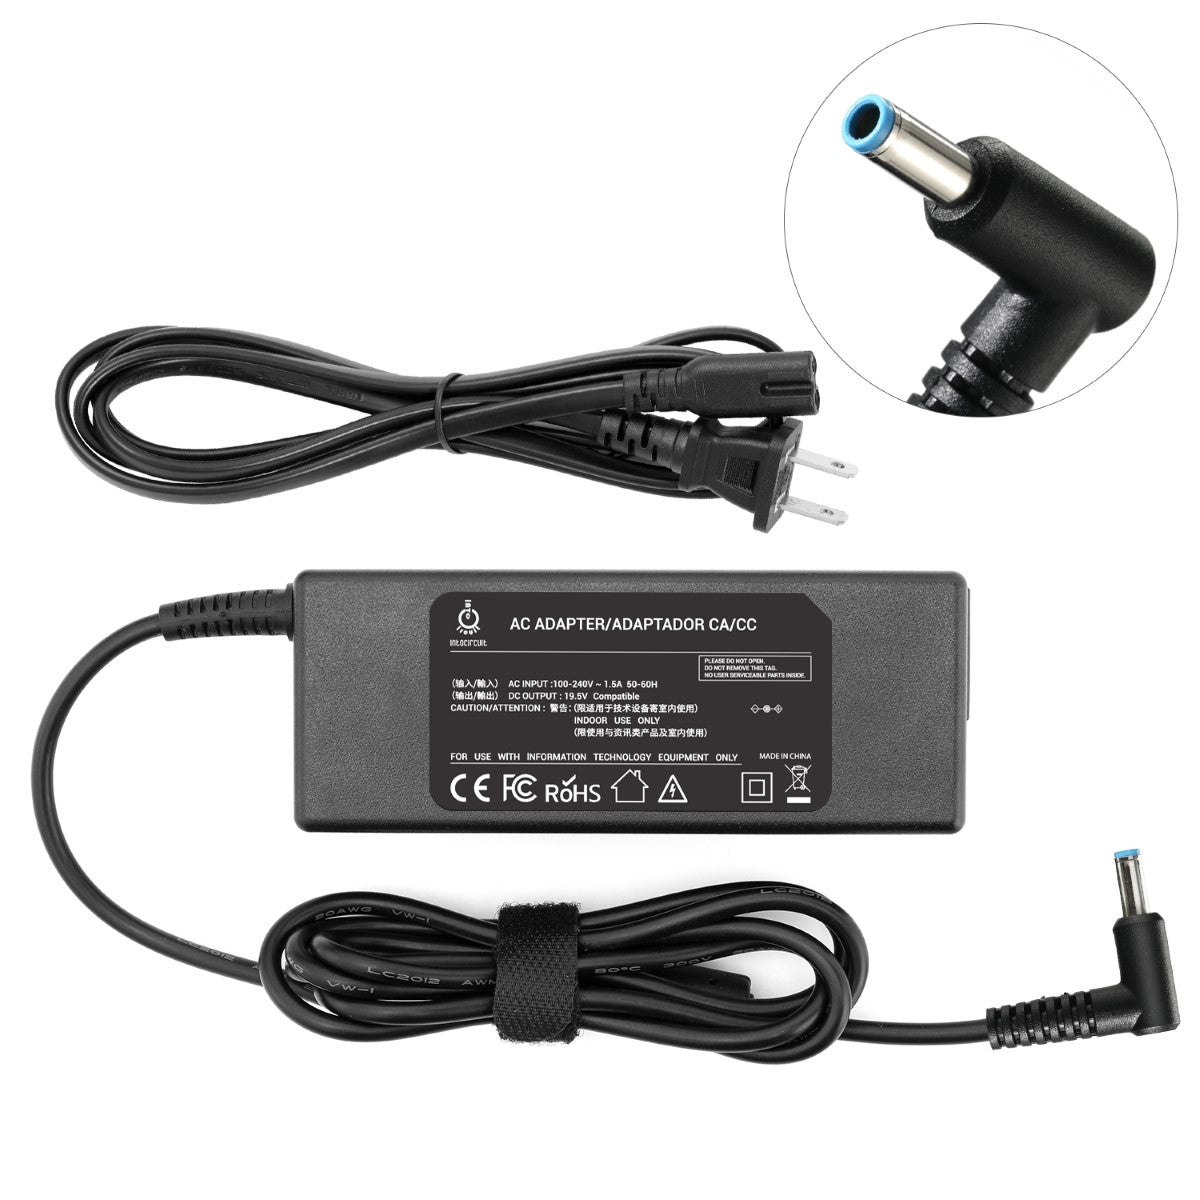 Power Adapter for HP 20-e014 All-in-One Desktop